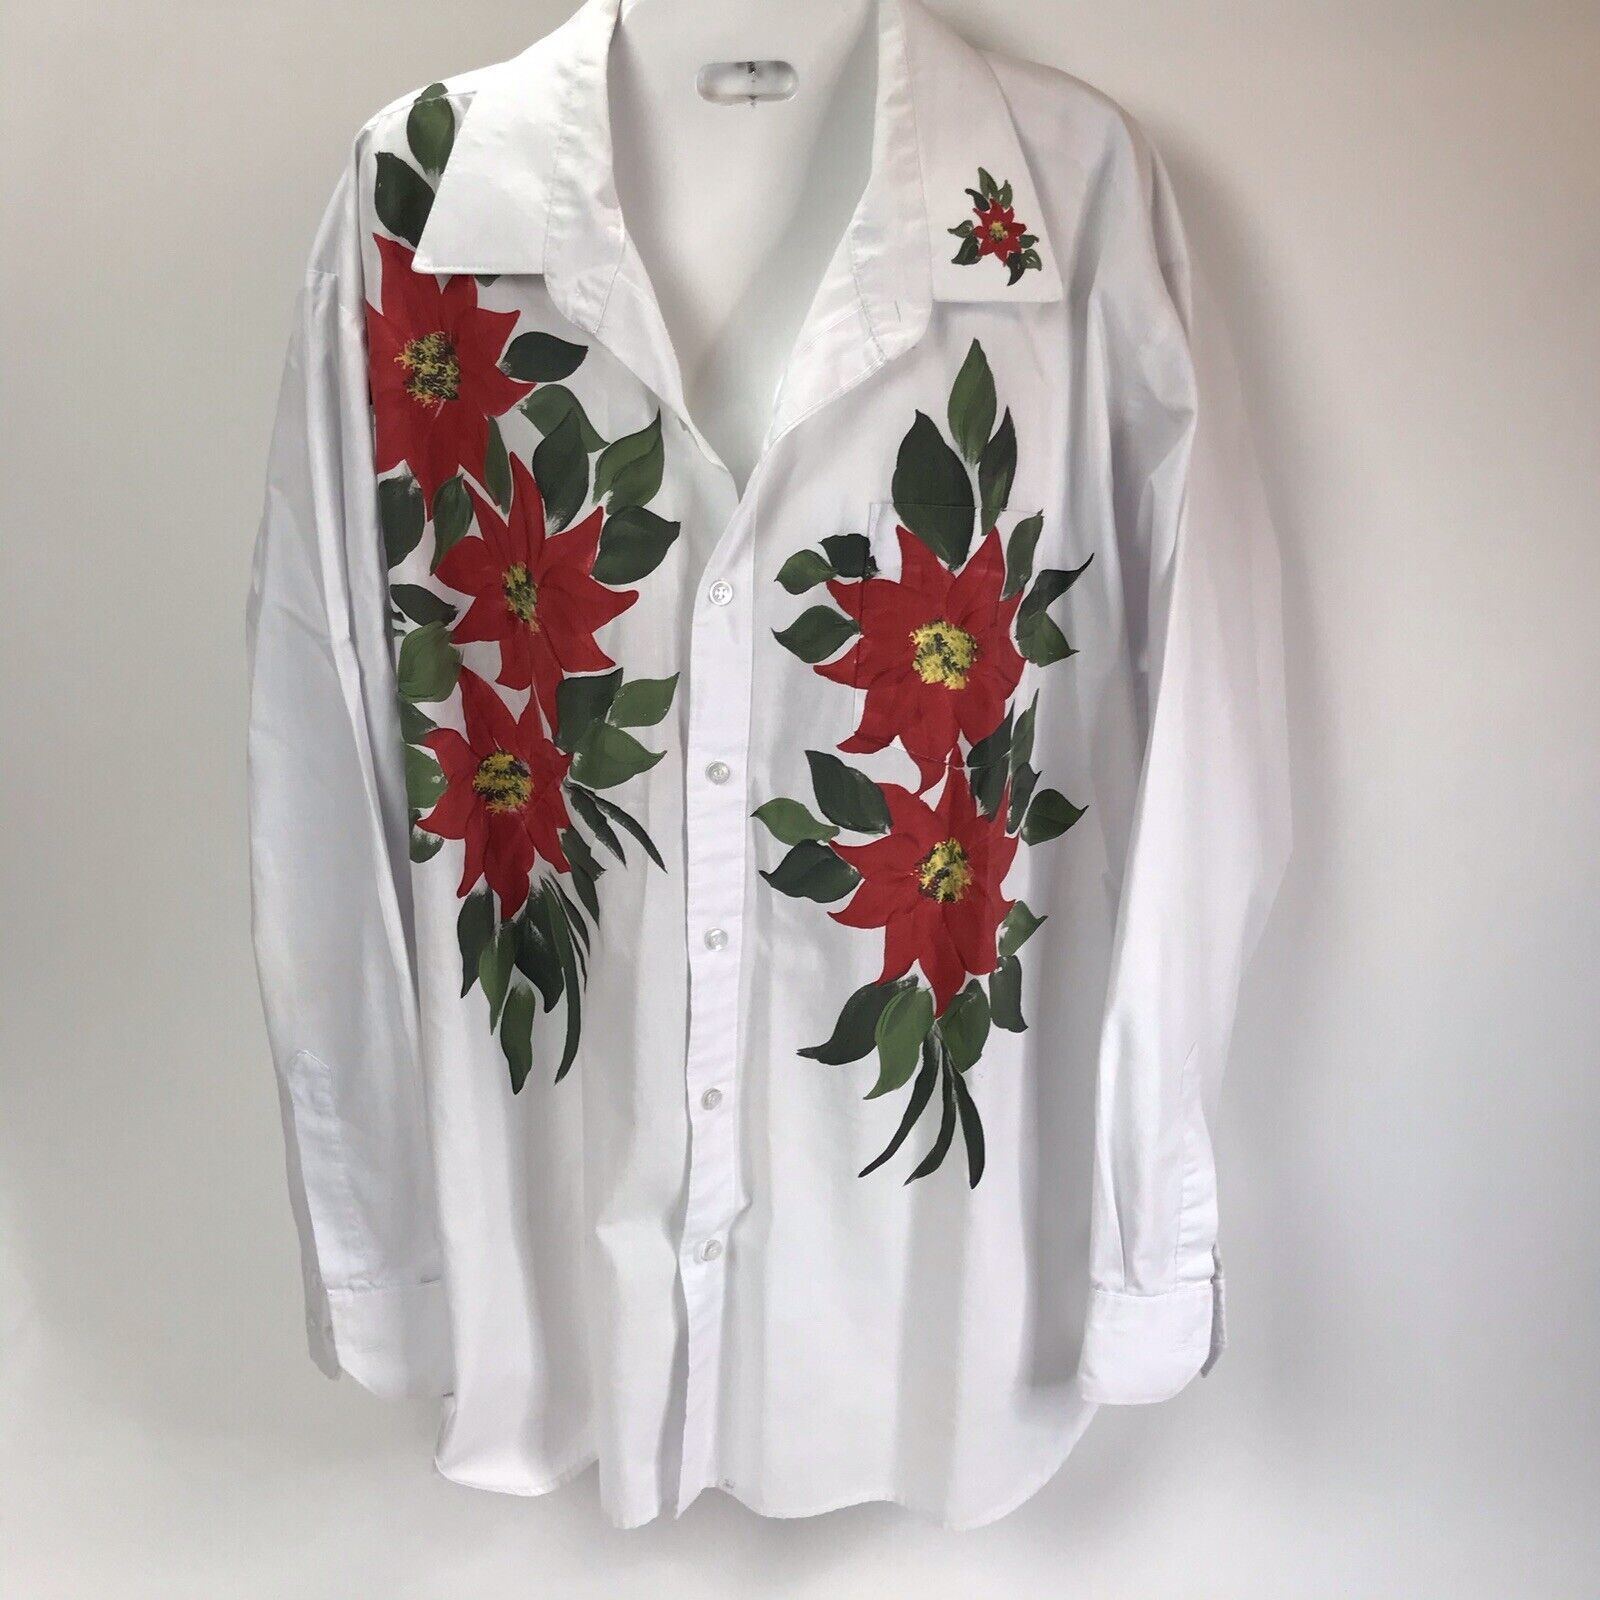 Primary image for Vintage Hand Painted Christmas Blouse XL Rene De France Poinsettias Art To Wear